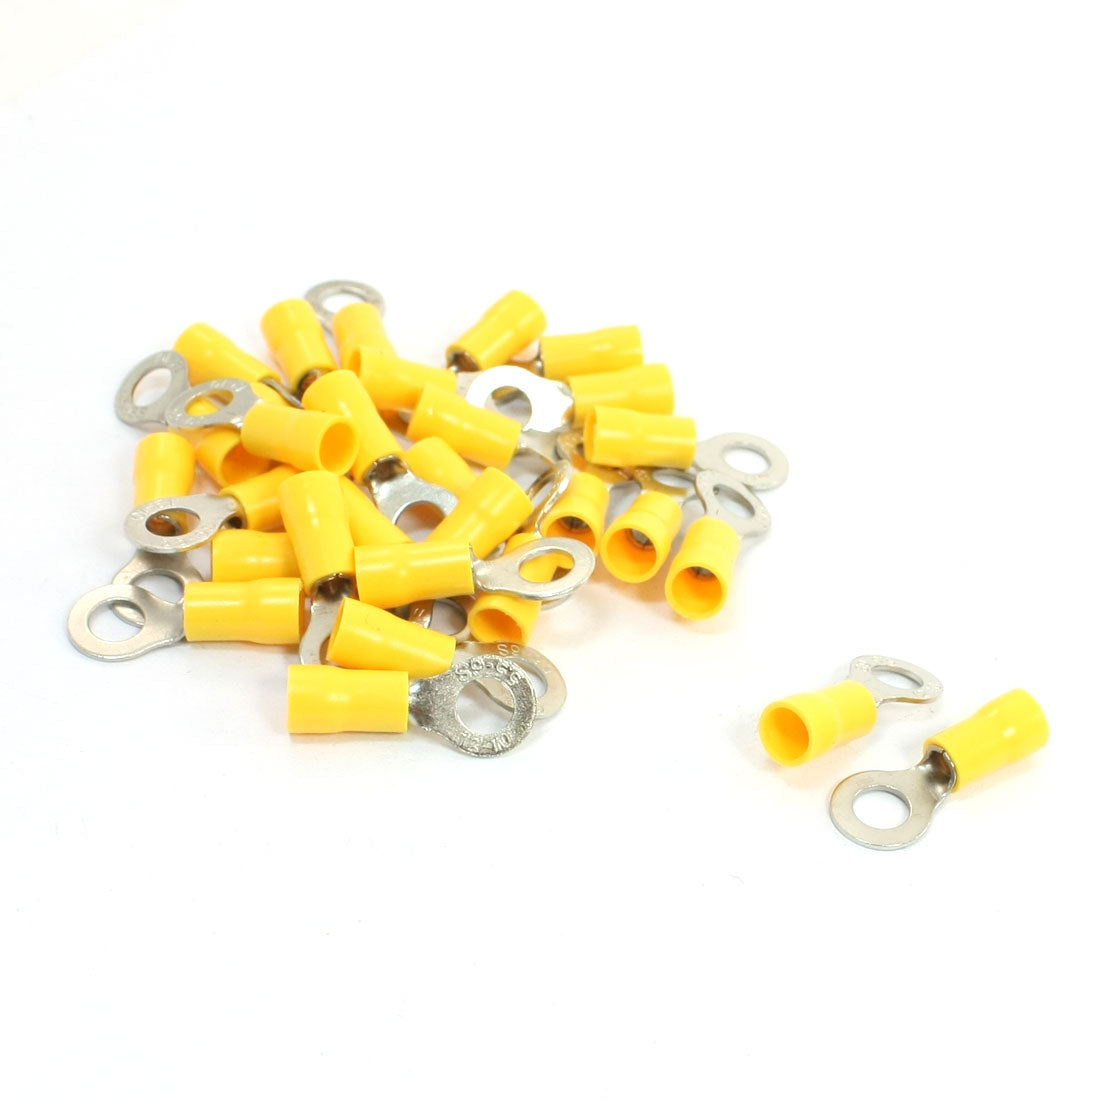 uxcell Uxcell 30Pcs RV5.5-6 Ring Tongue Pre Insulated Terminal Yellow for AWG 12-10